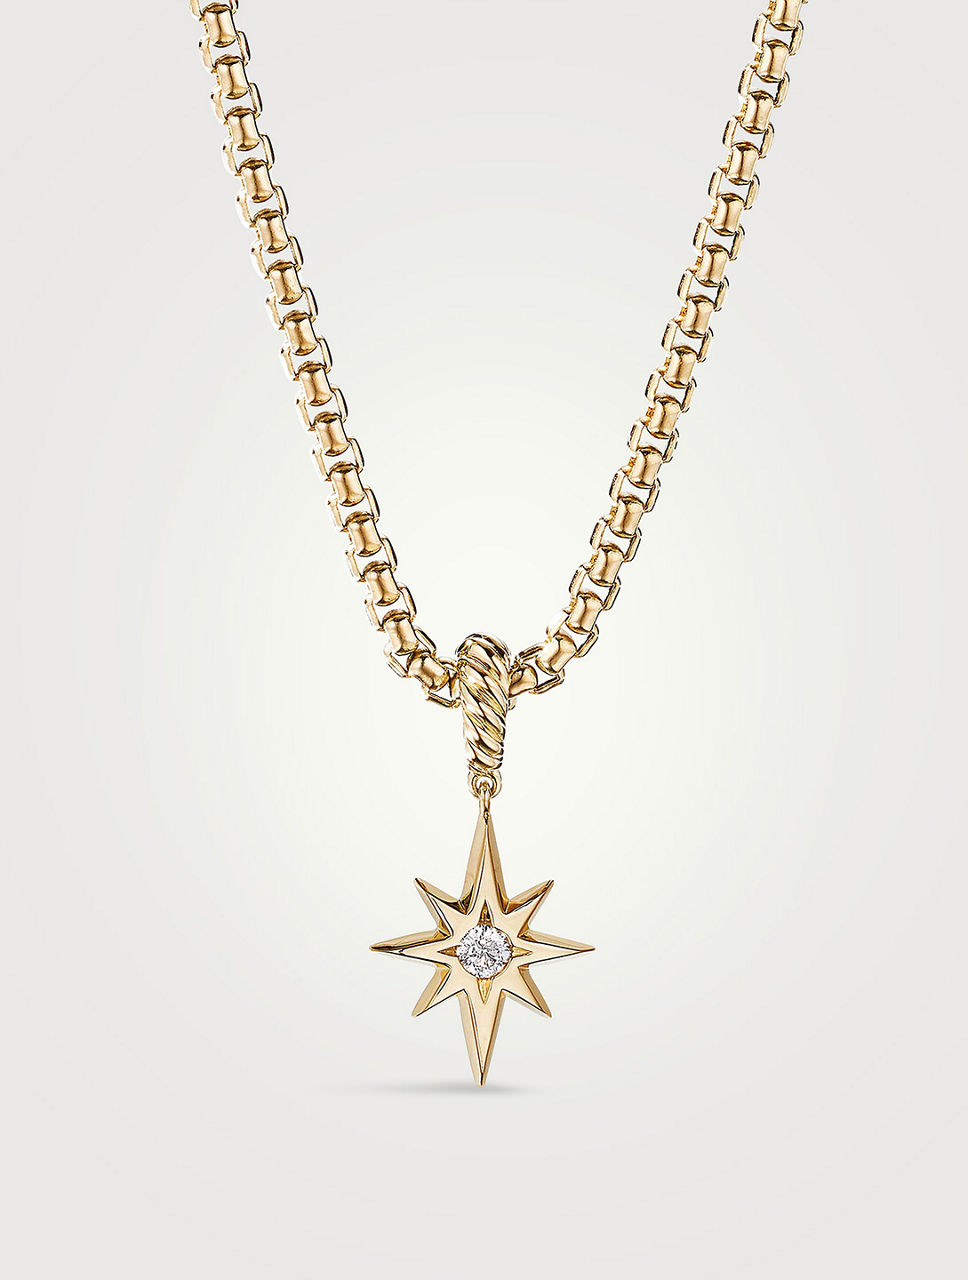 North Star Birthstone Amulet In 18k Yellow Gold With Center Diamond